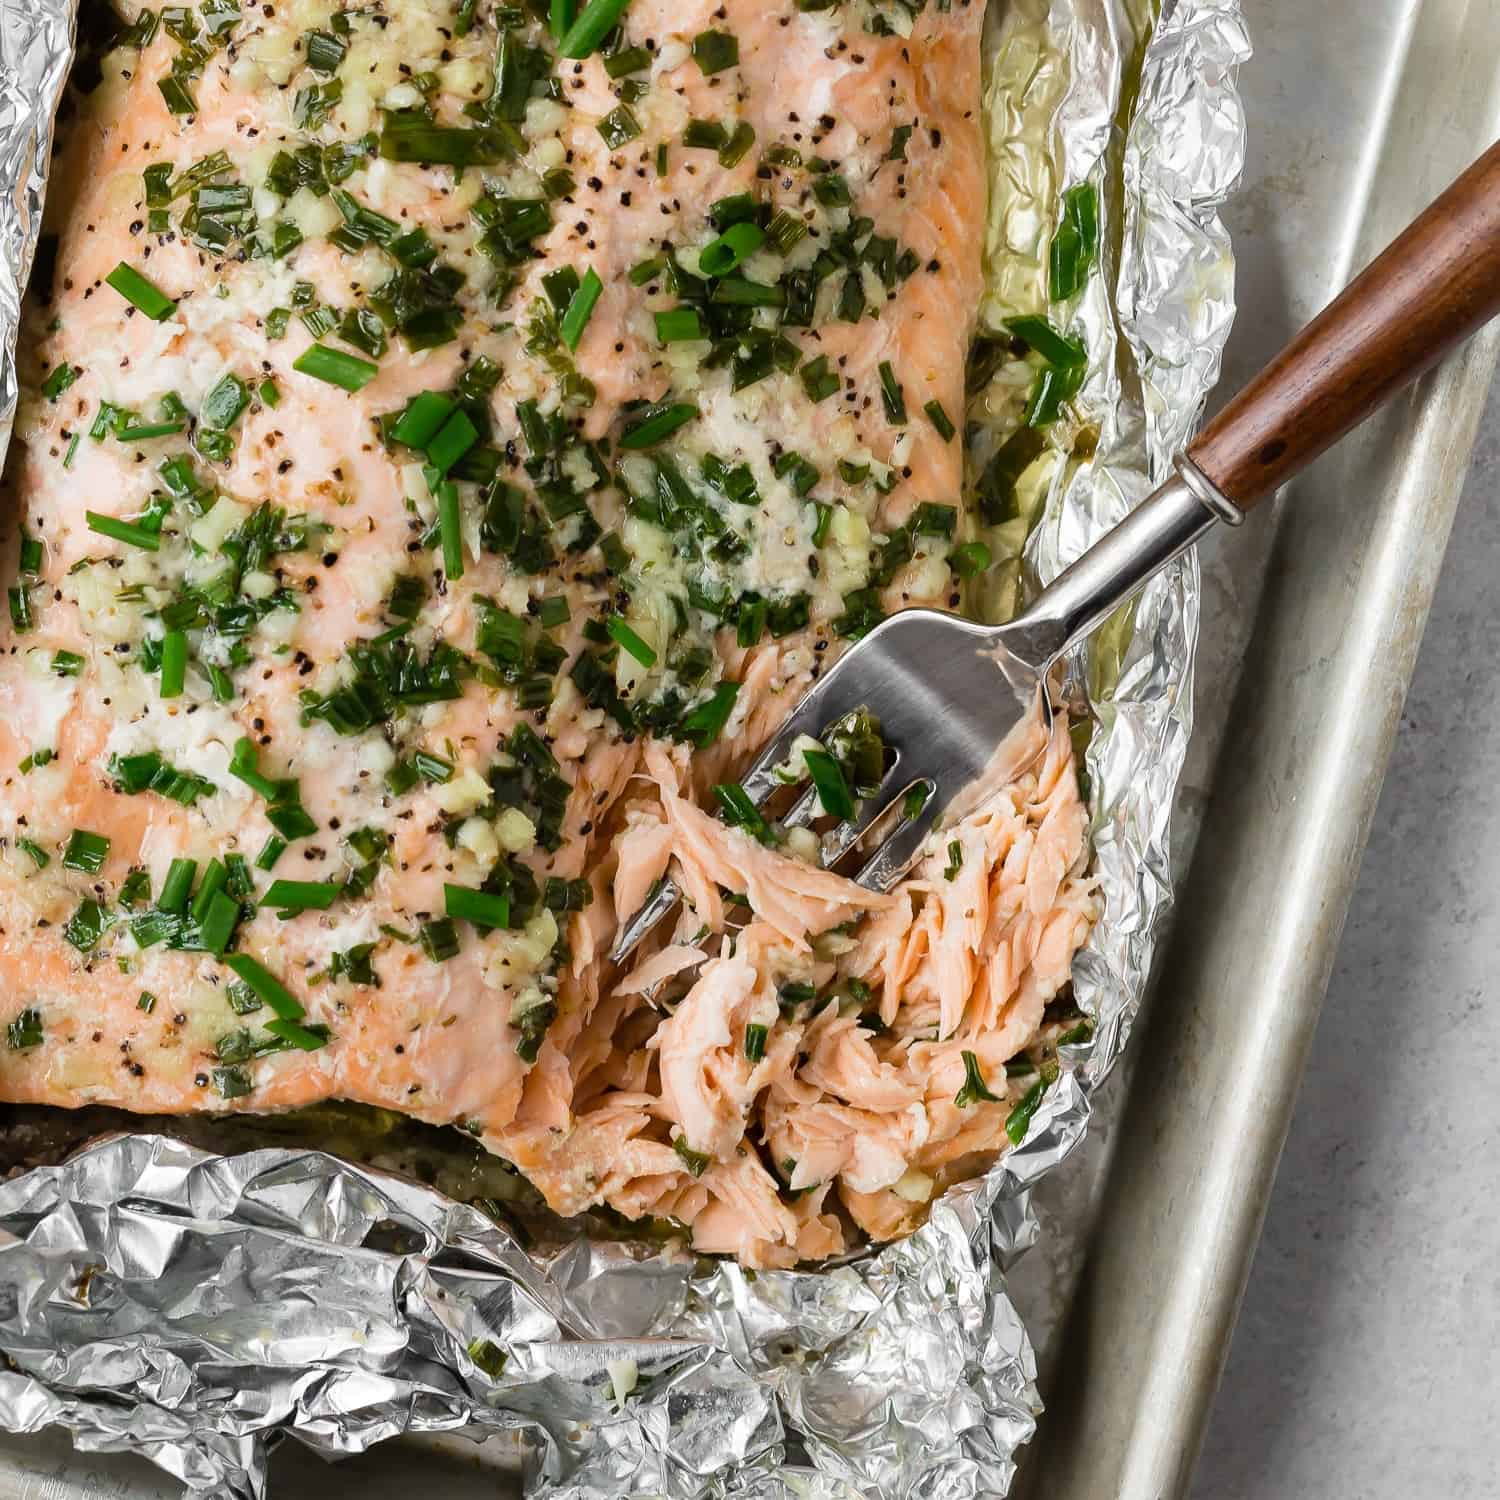 Aluminium Foil: Which Side you want to use? - Fine Dining Lovers